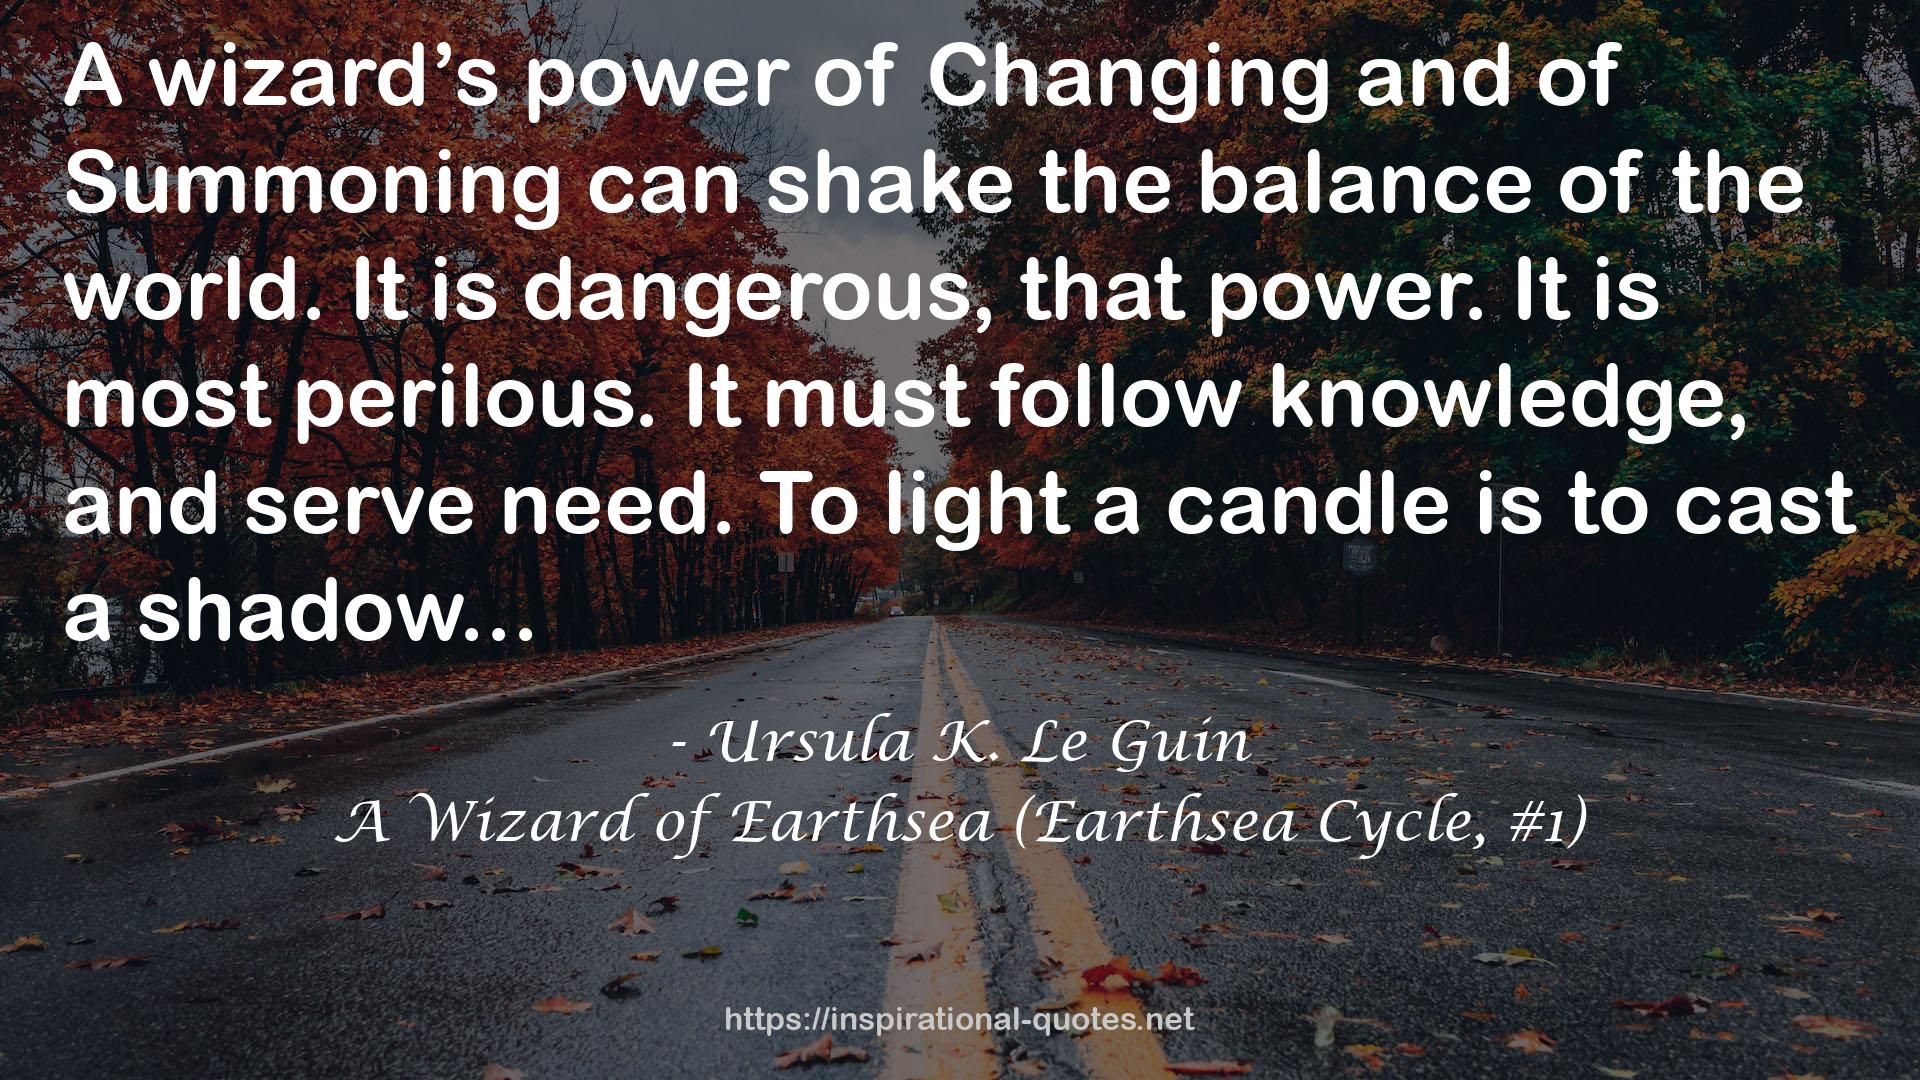 A Wizard of Earthsea (Earthsea Cycle, #1) QUOTES